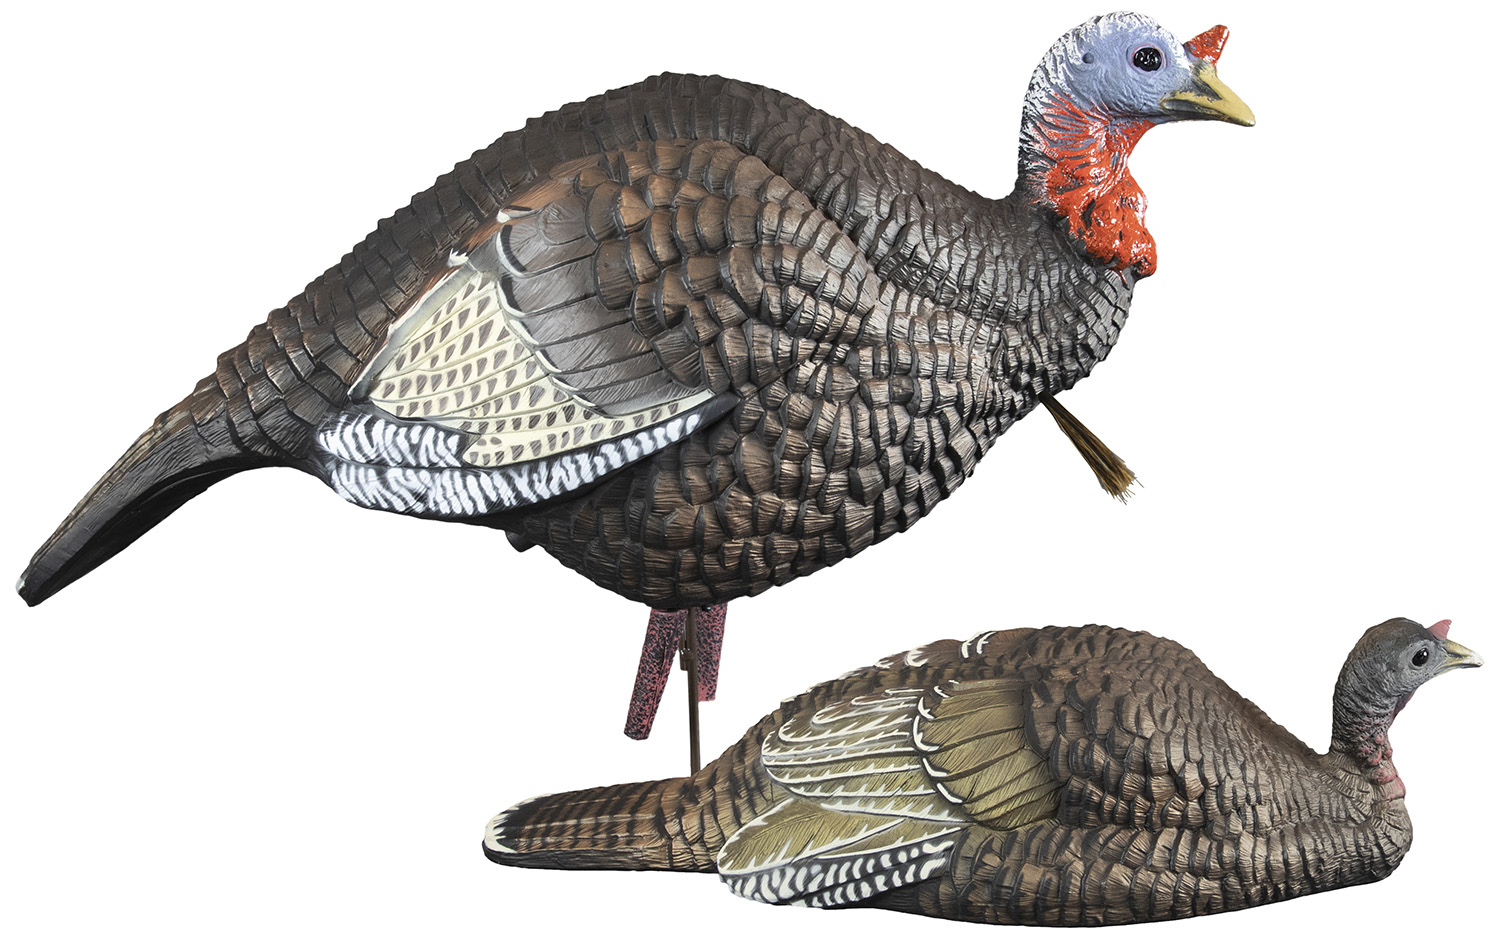 Higdon Outdoors 63181   XHD Hyper Feathering & Iridescence, Lightweight Hard Body Construction, Includes Laydown Position Hen & Semi-Aggressive Posture Jake